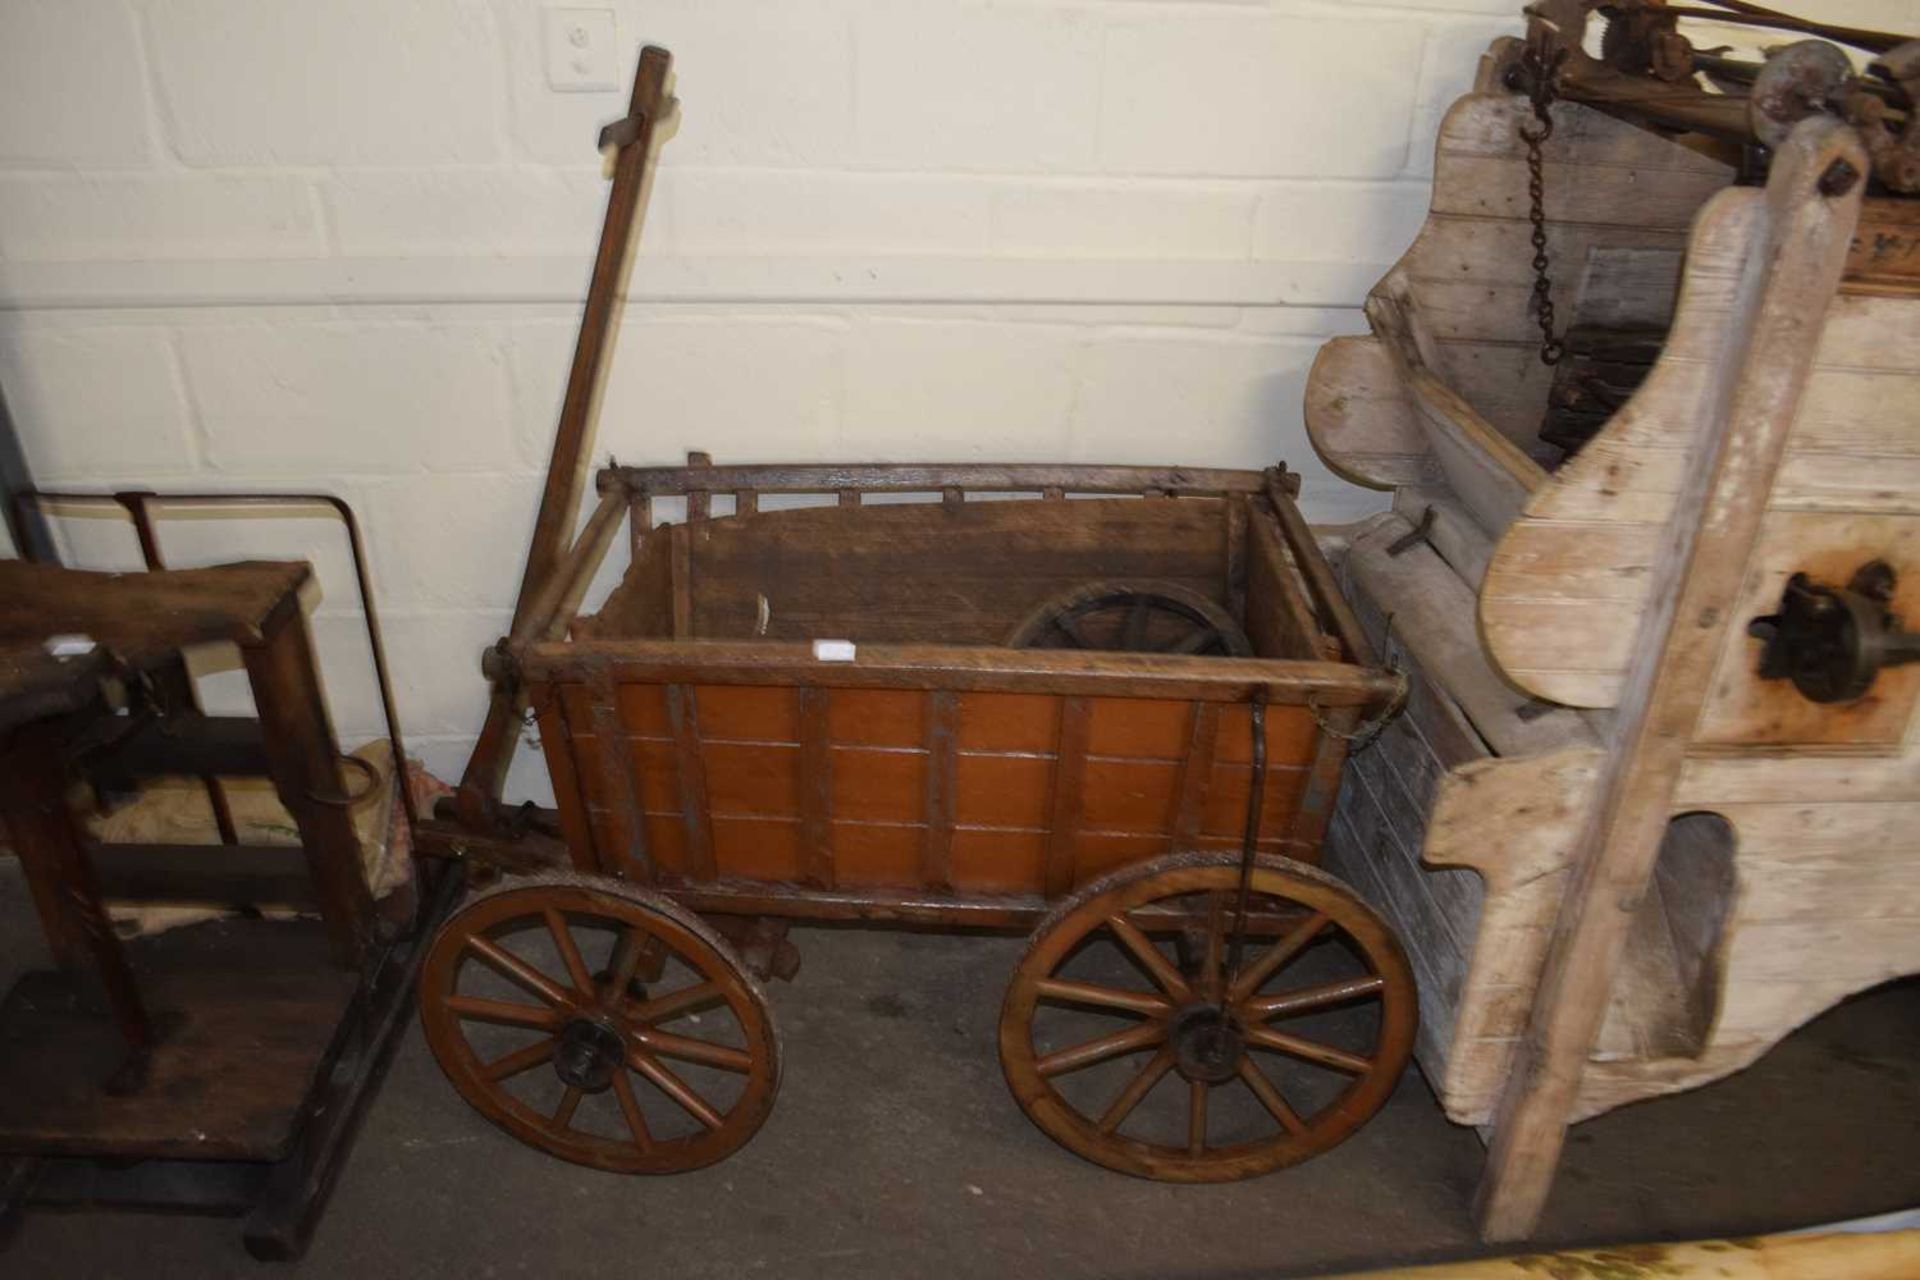 Vintage four wheeled hand cart with painted wooden body and iron mounted wheels